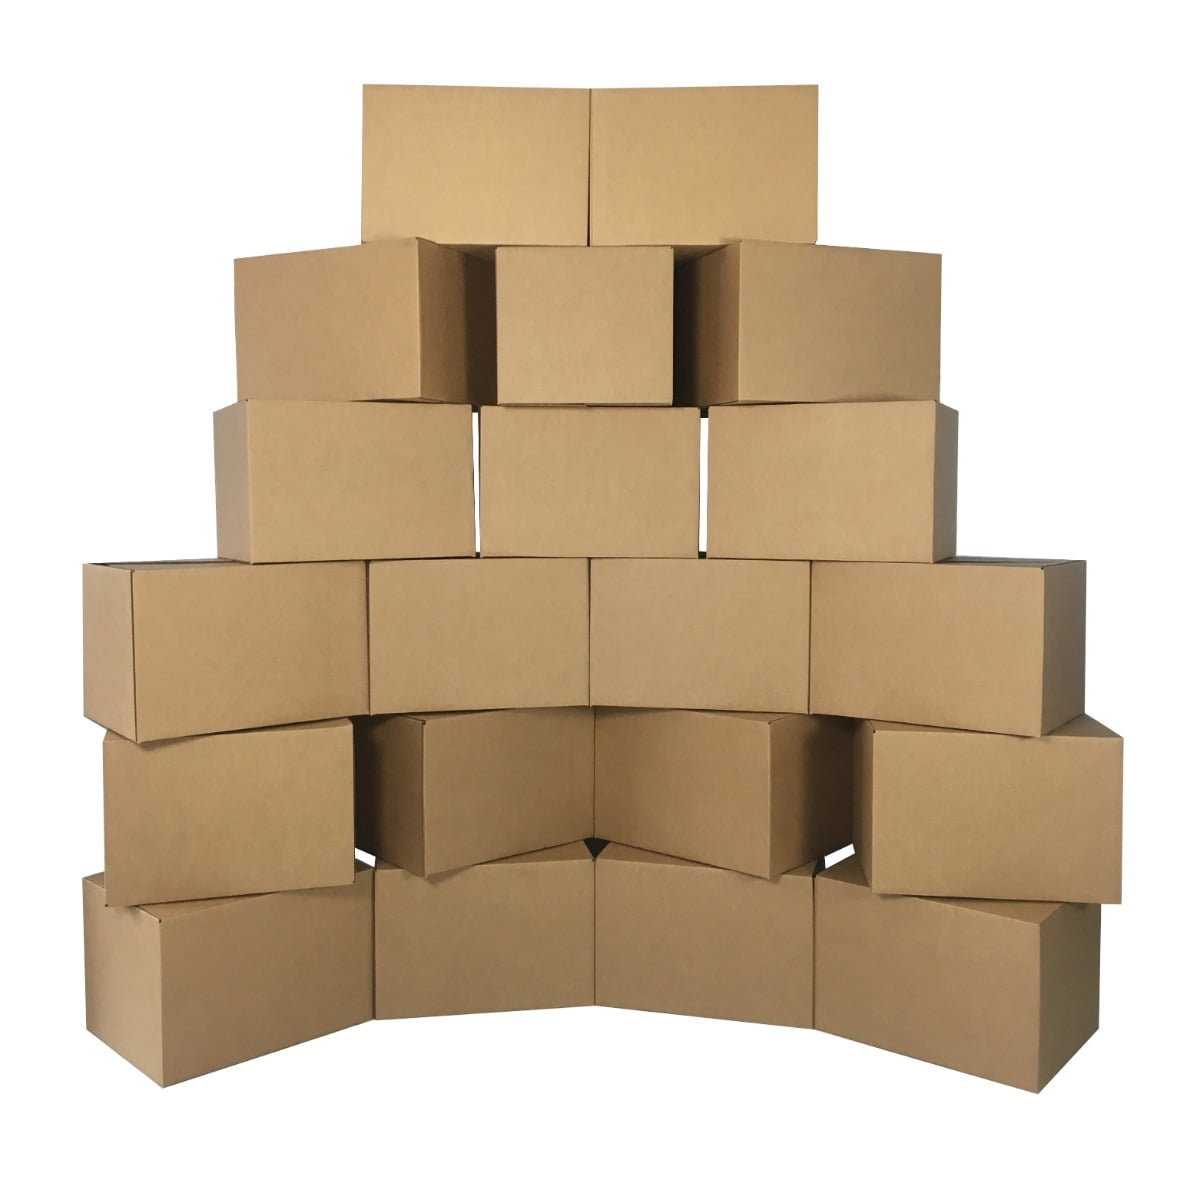 20 x A4 12x9x9" S/W Medium Size Cardboard Packing Boxes 